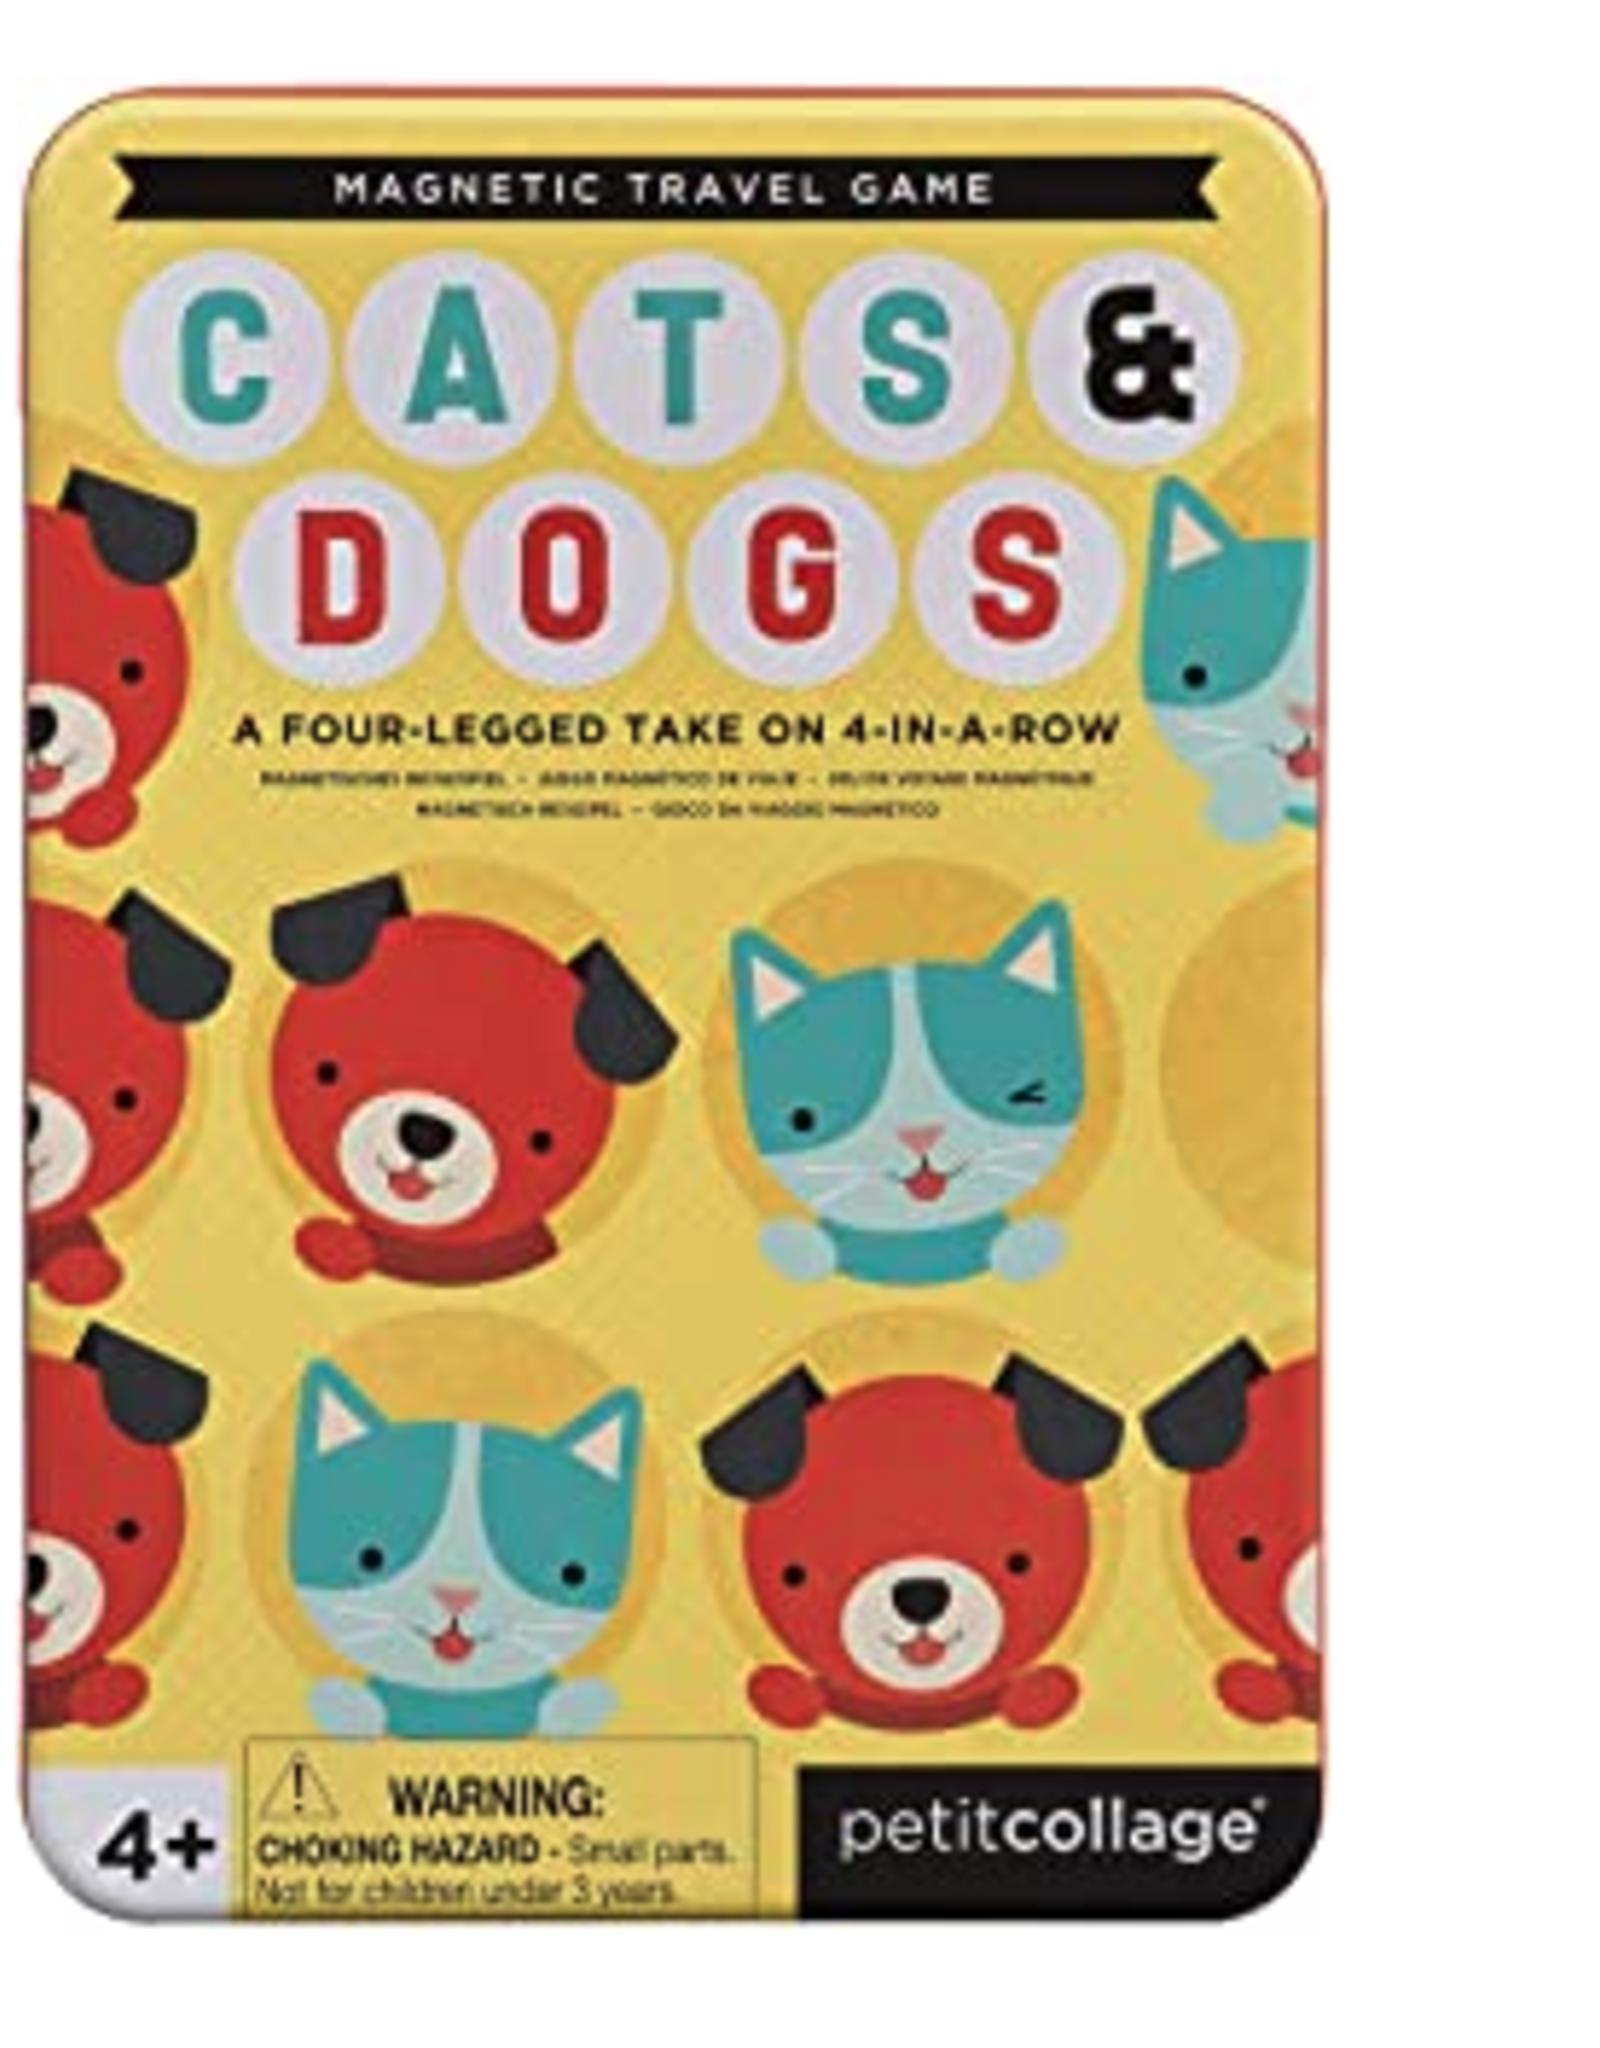 Cats and Dogs Magnetic Travel Game